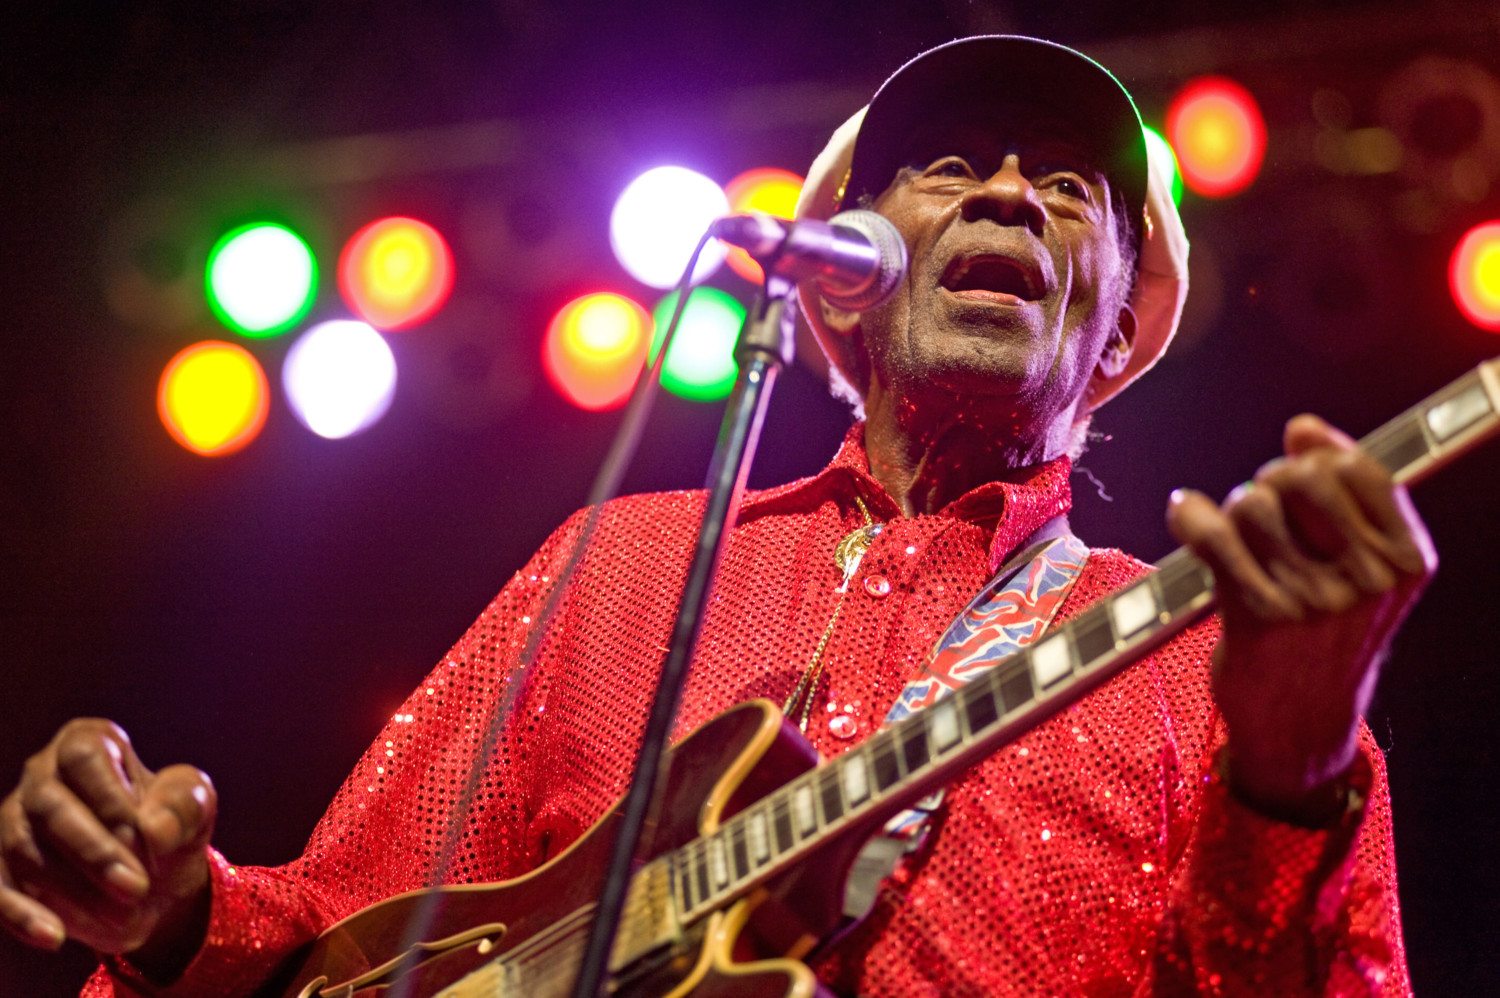 Chuck Berry In Concert - January 1, 2011